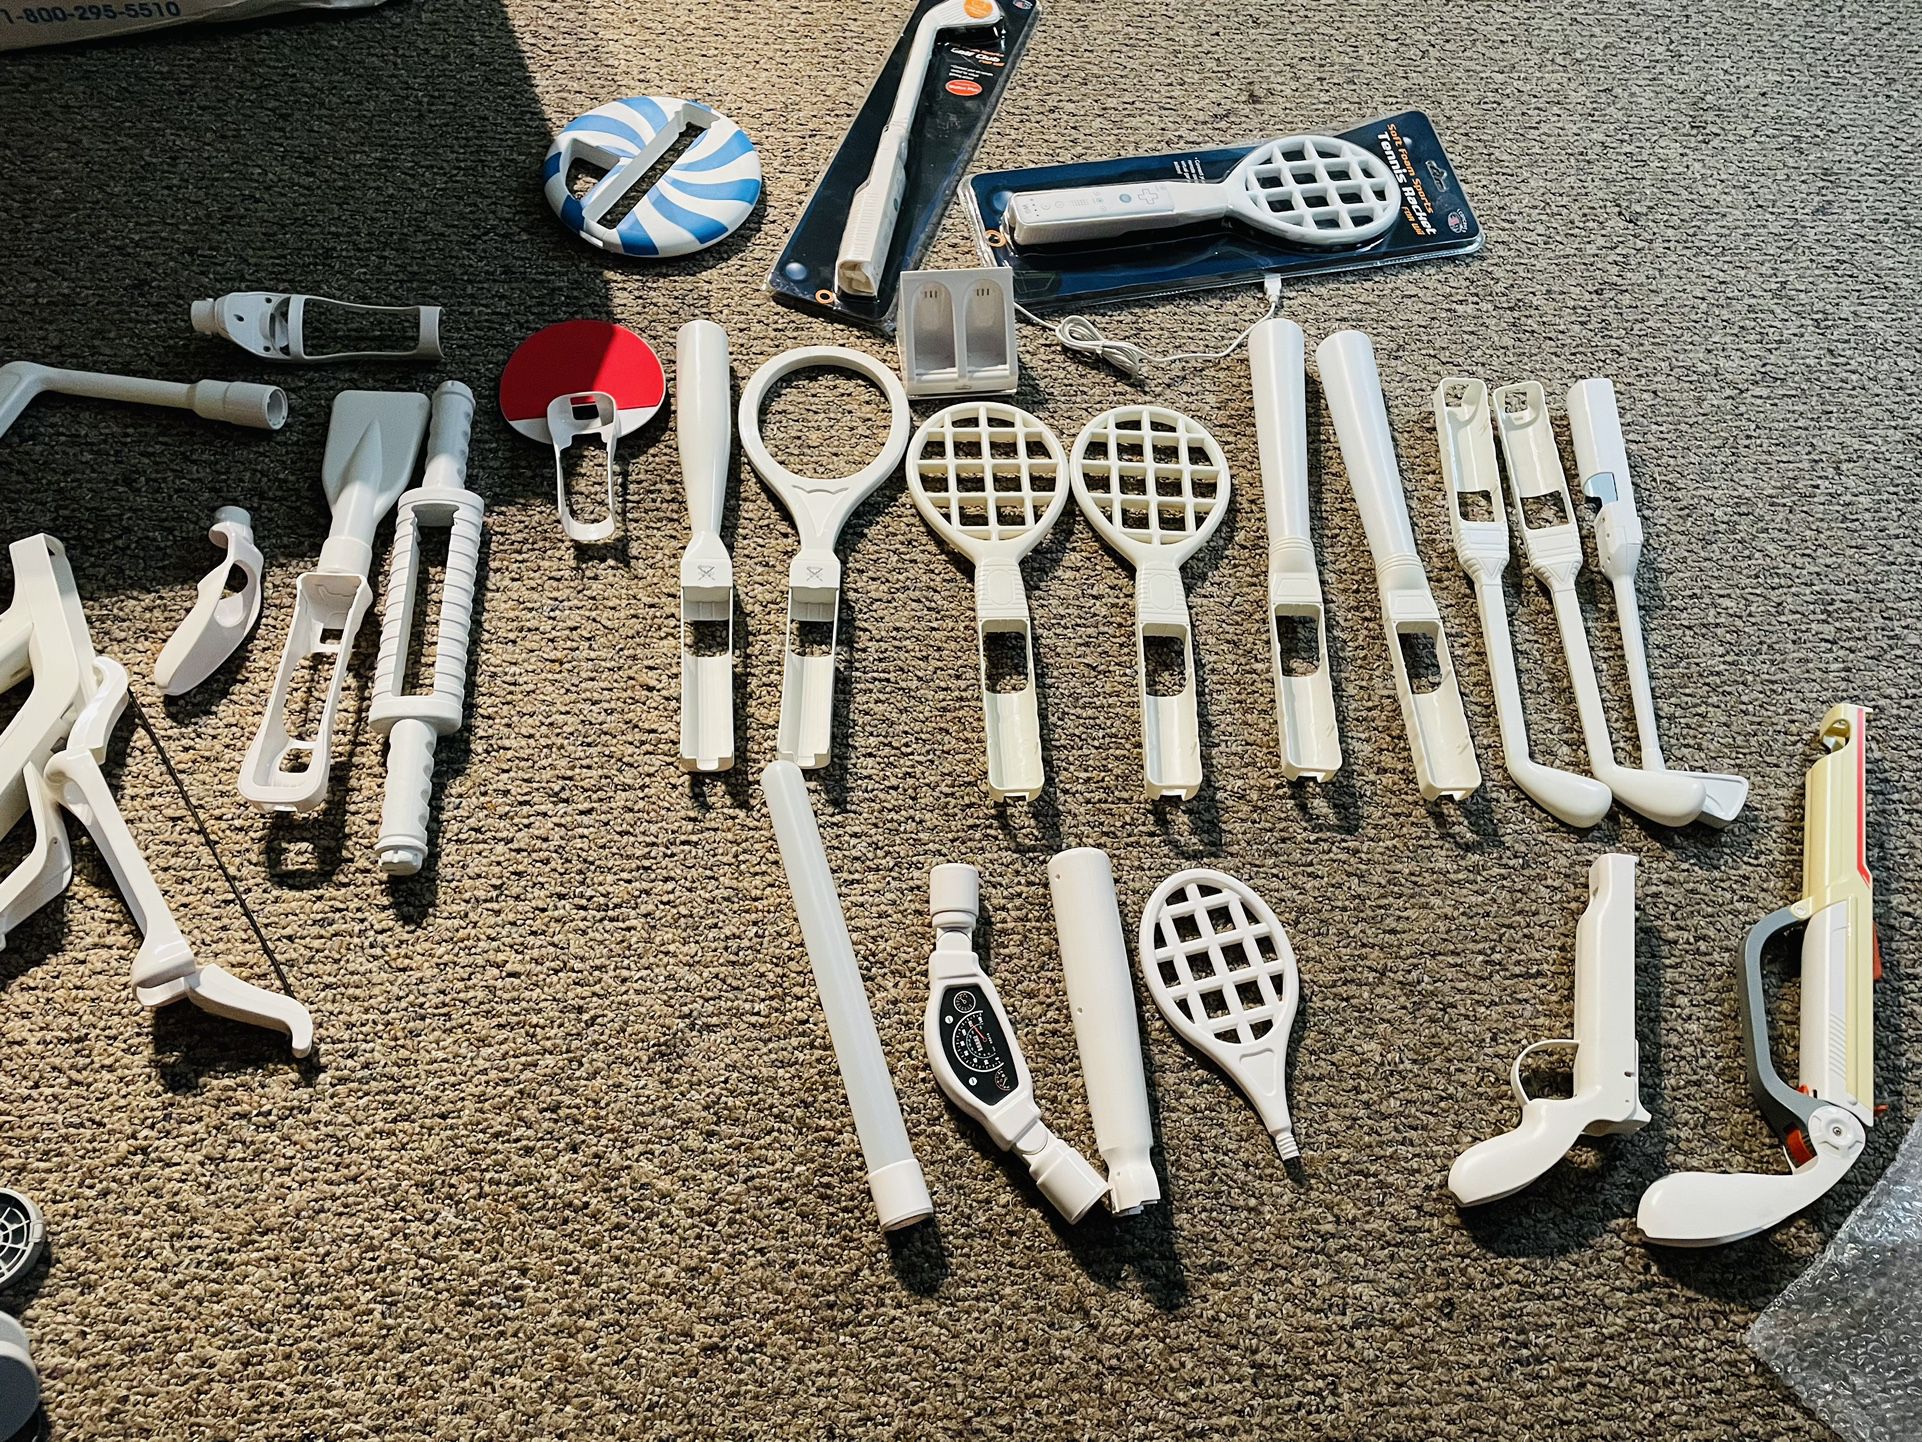 nintendo wii accessories Everything for 1 price